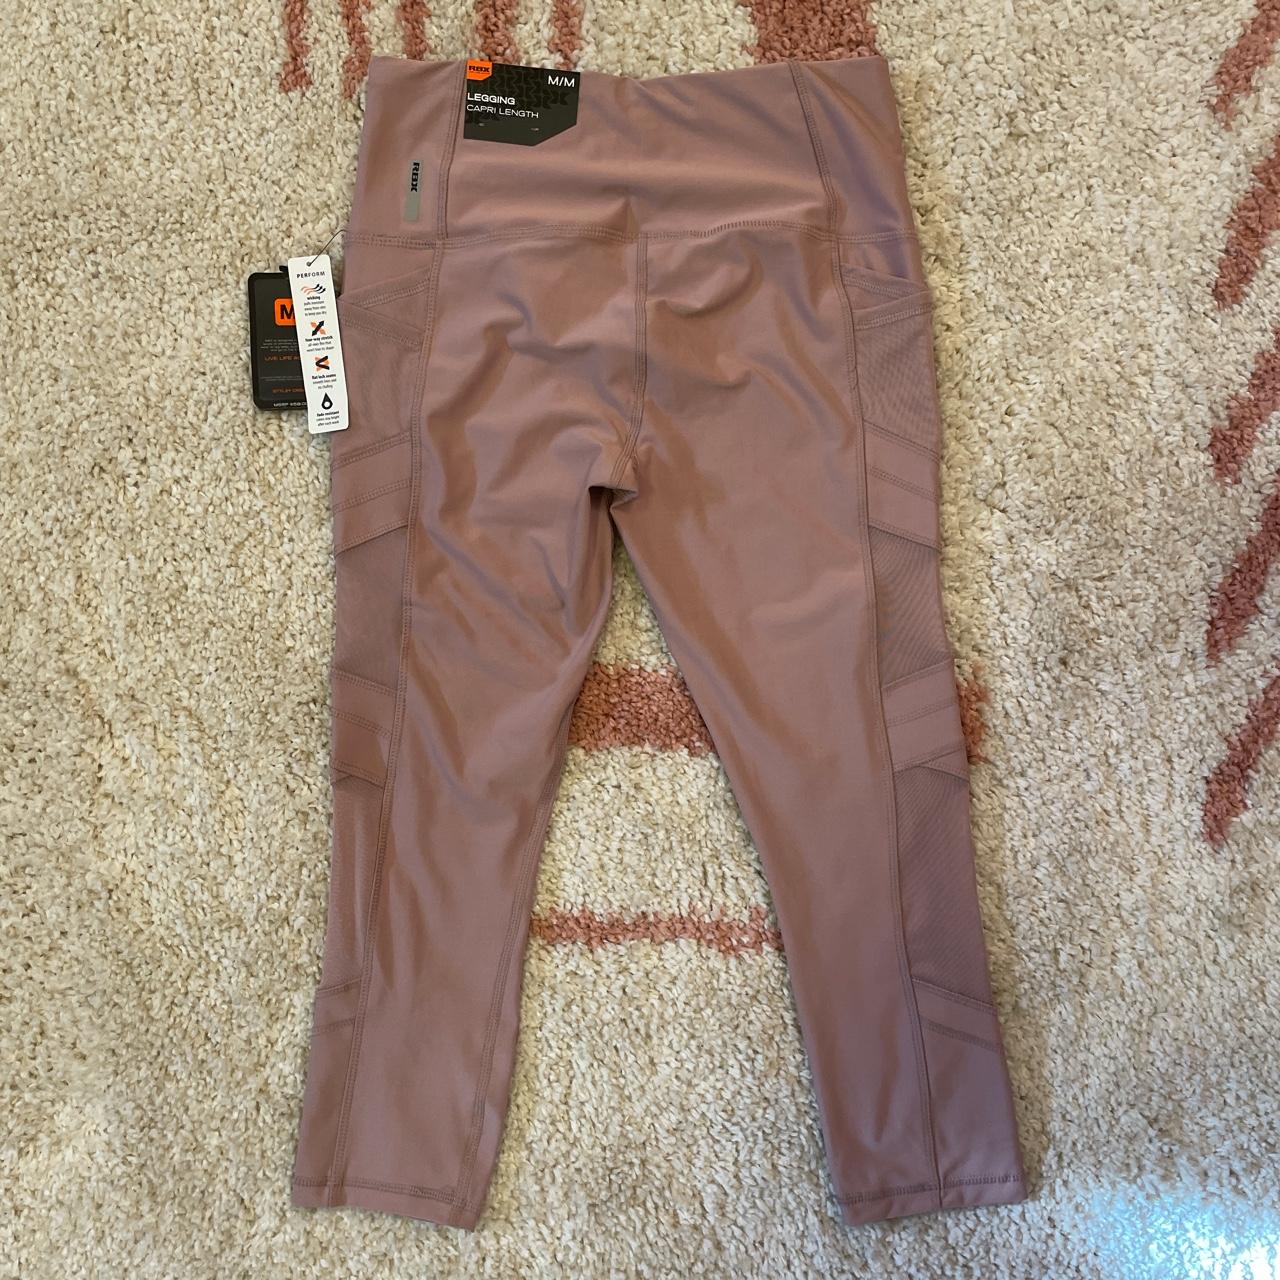 Brand new RBX active leggings in a beautiful mauve - Depop